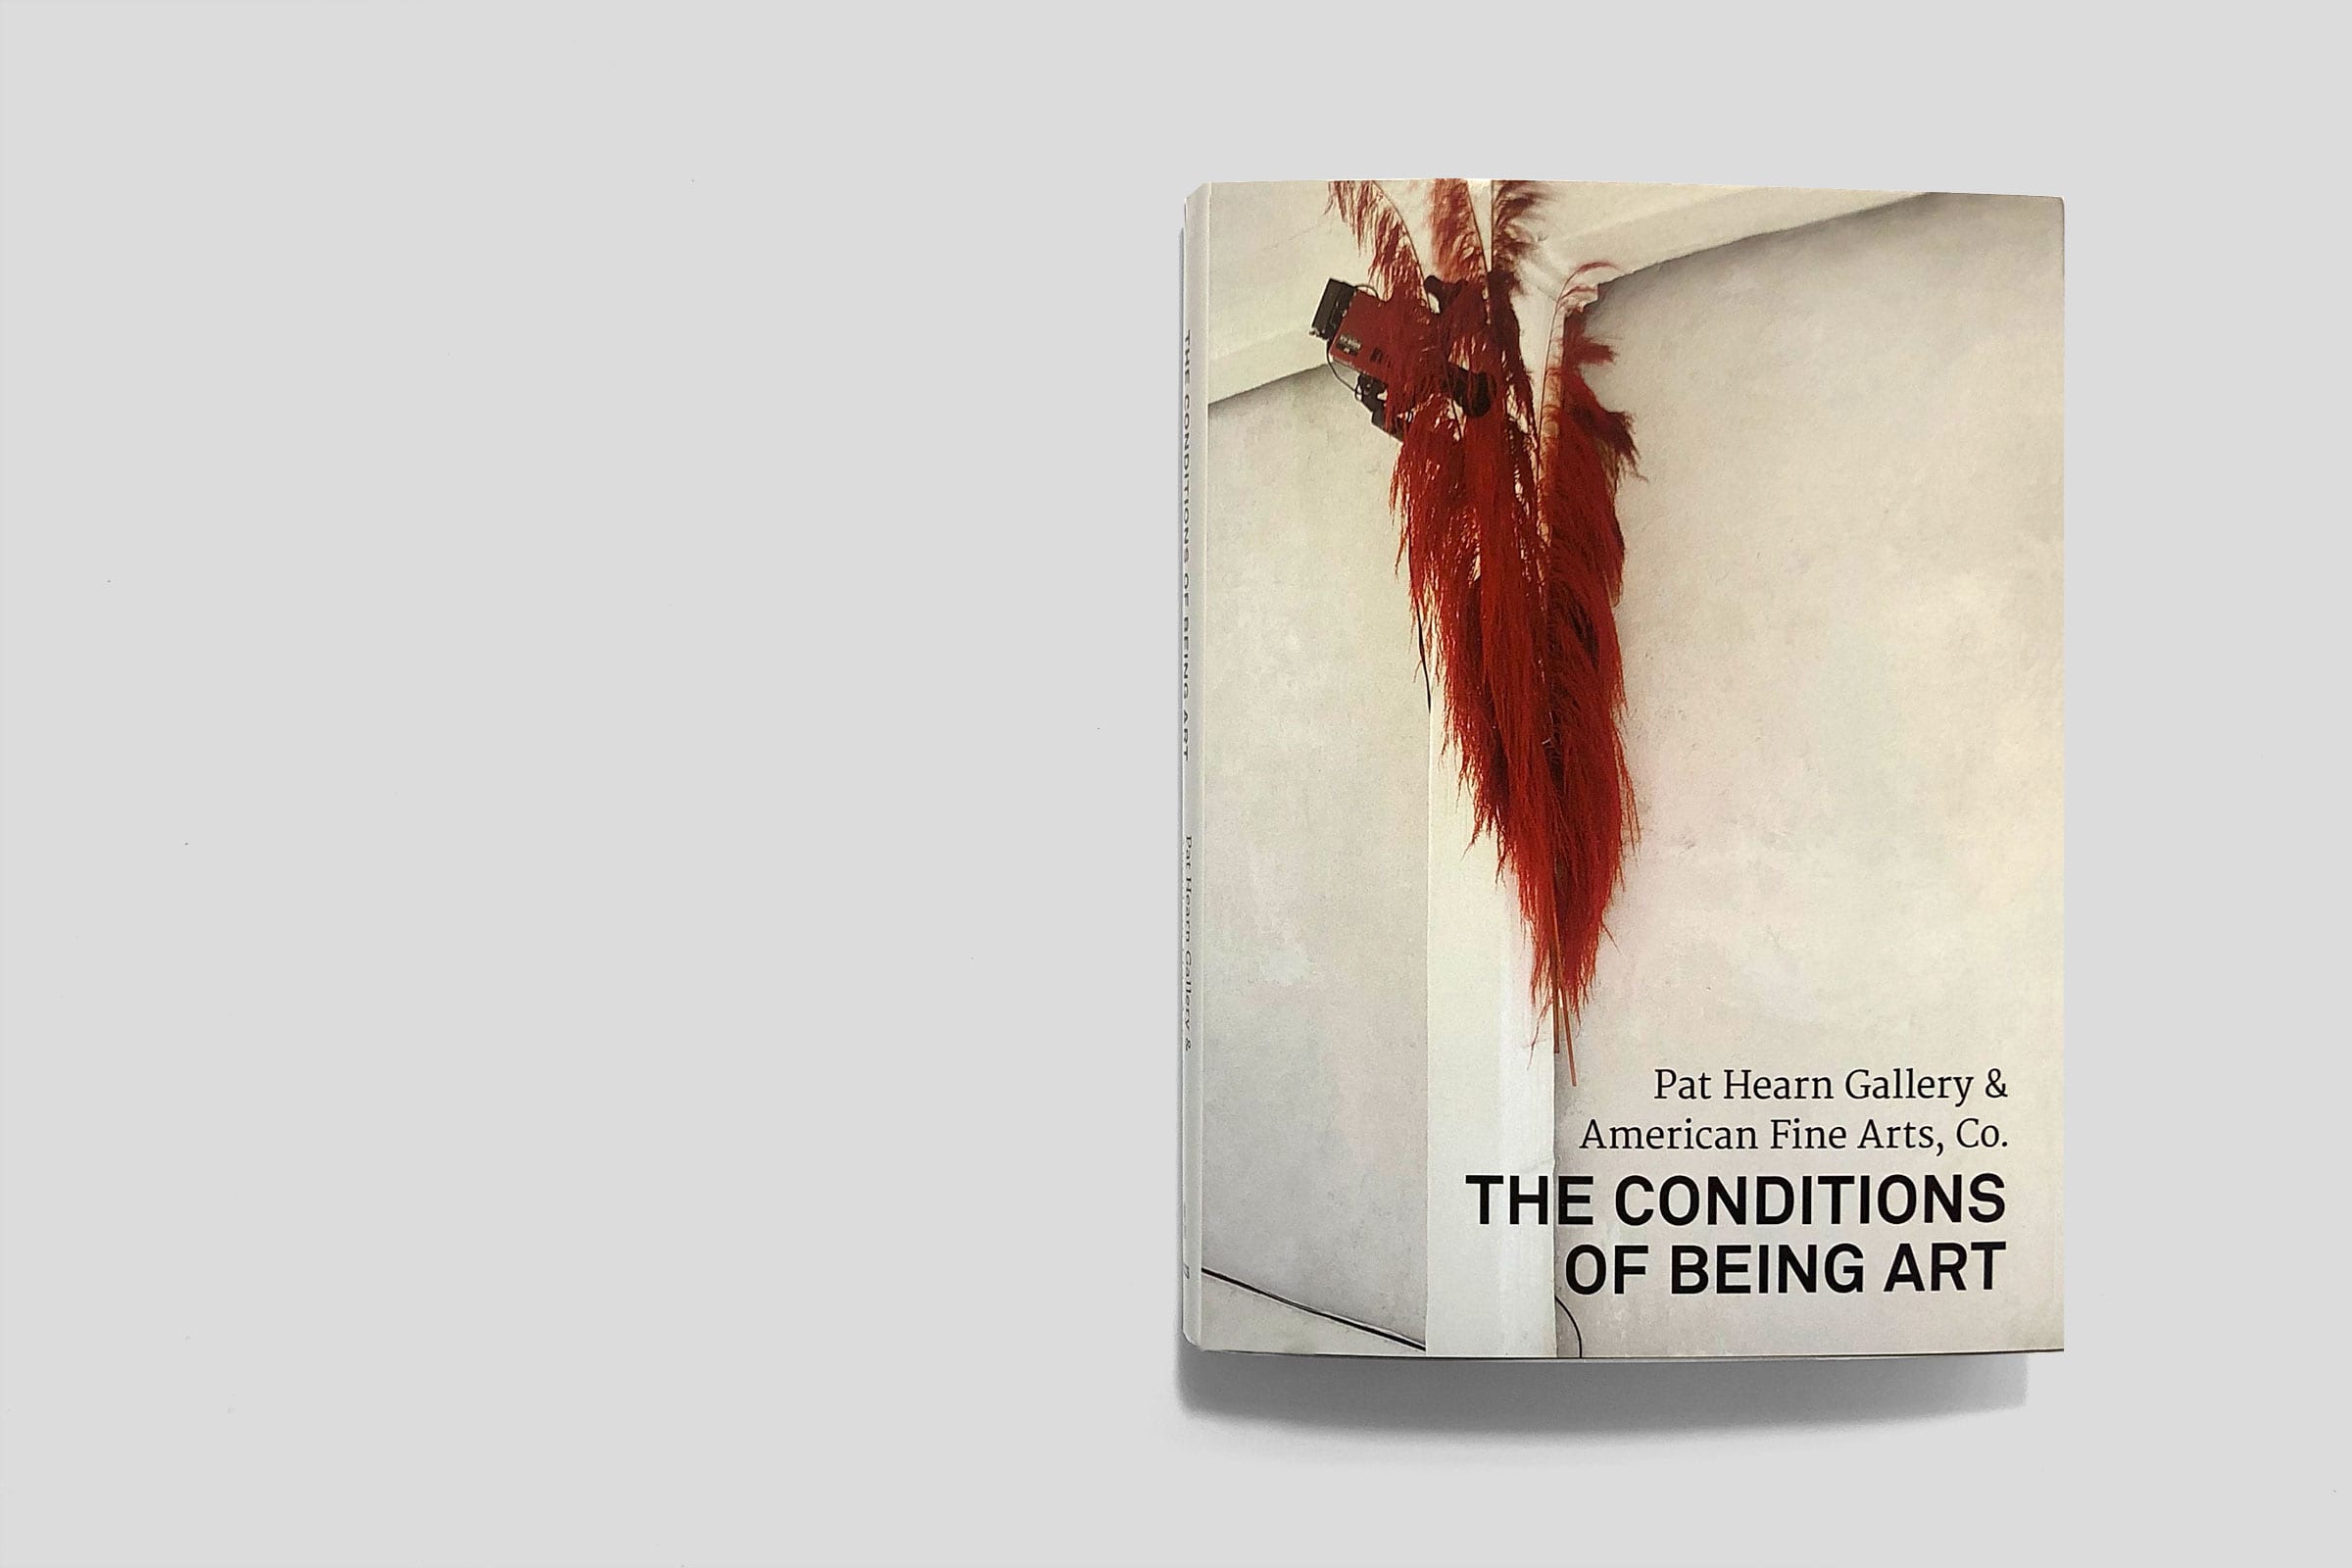 Gebr. Silvestri xSITE – ‘The conditions of being art: Pat Hearn Gallery and American Fine Arts, Co.’